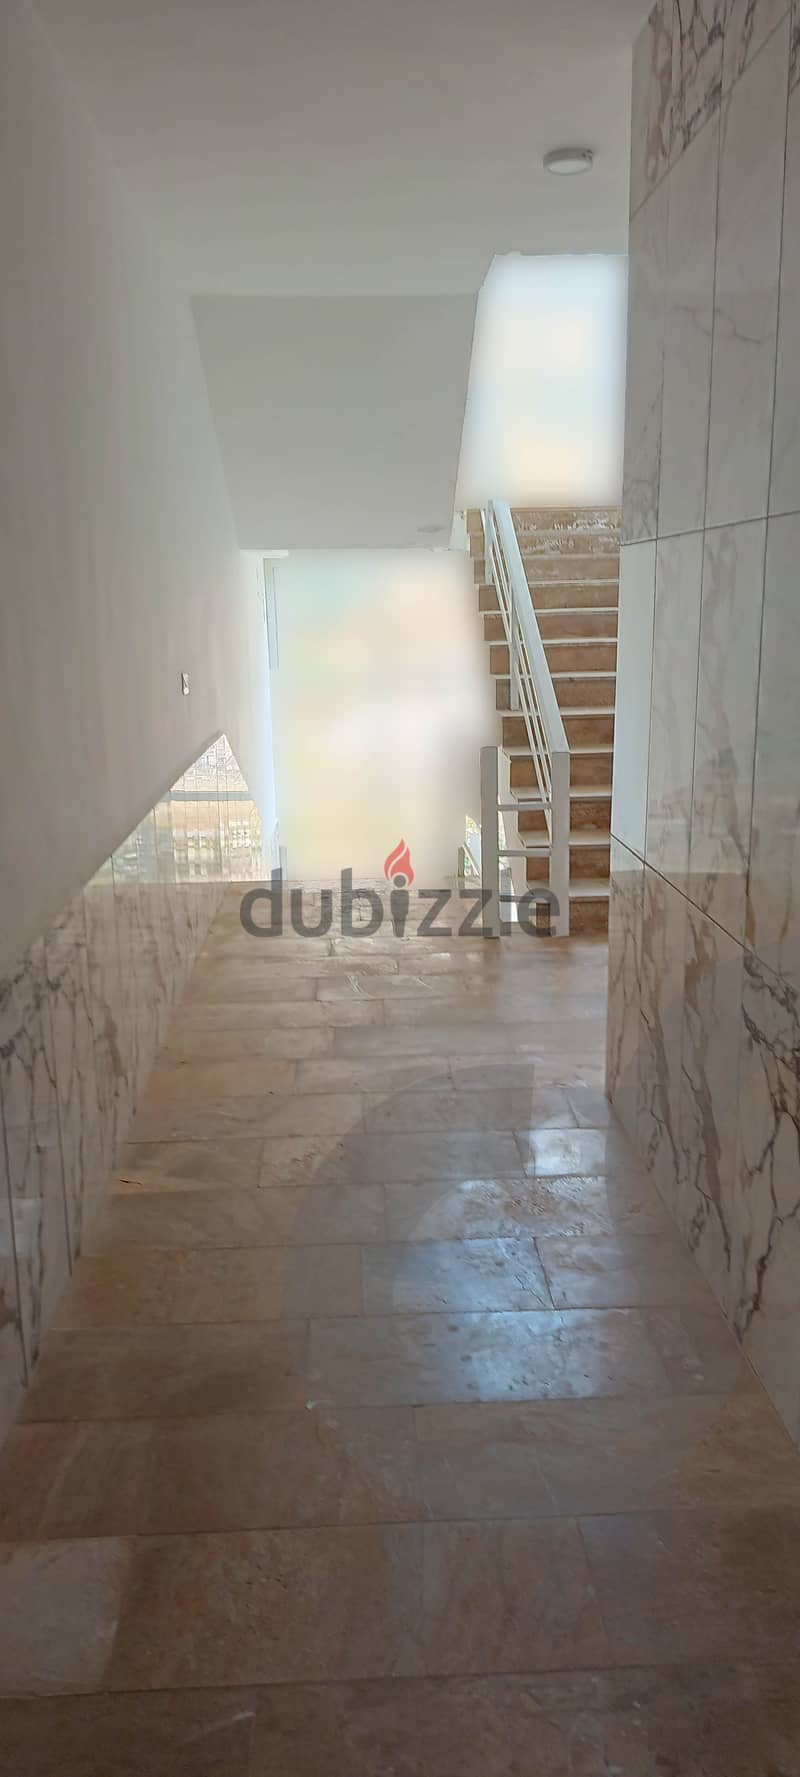 apartment for rent in Bshamoun Al Kroom/بشامون  REF#NY103140 3